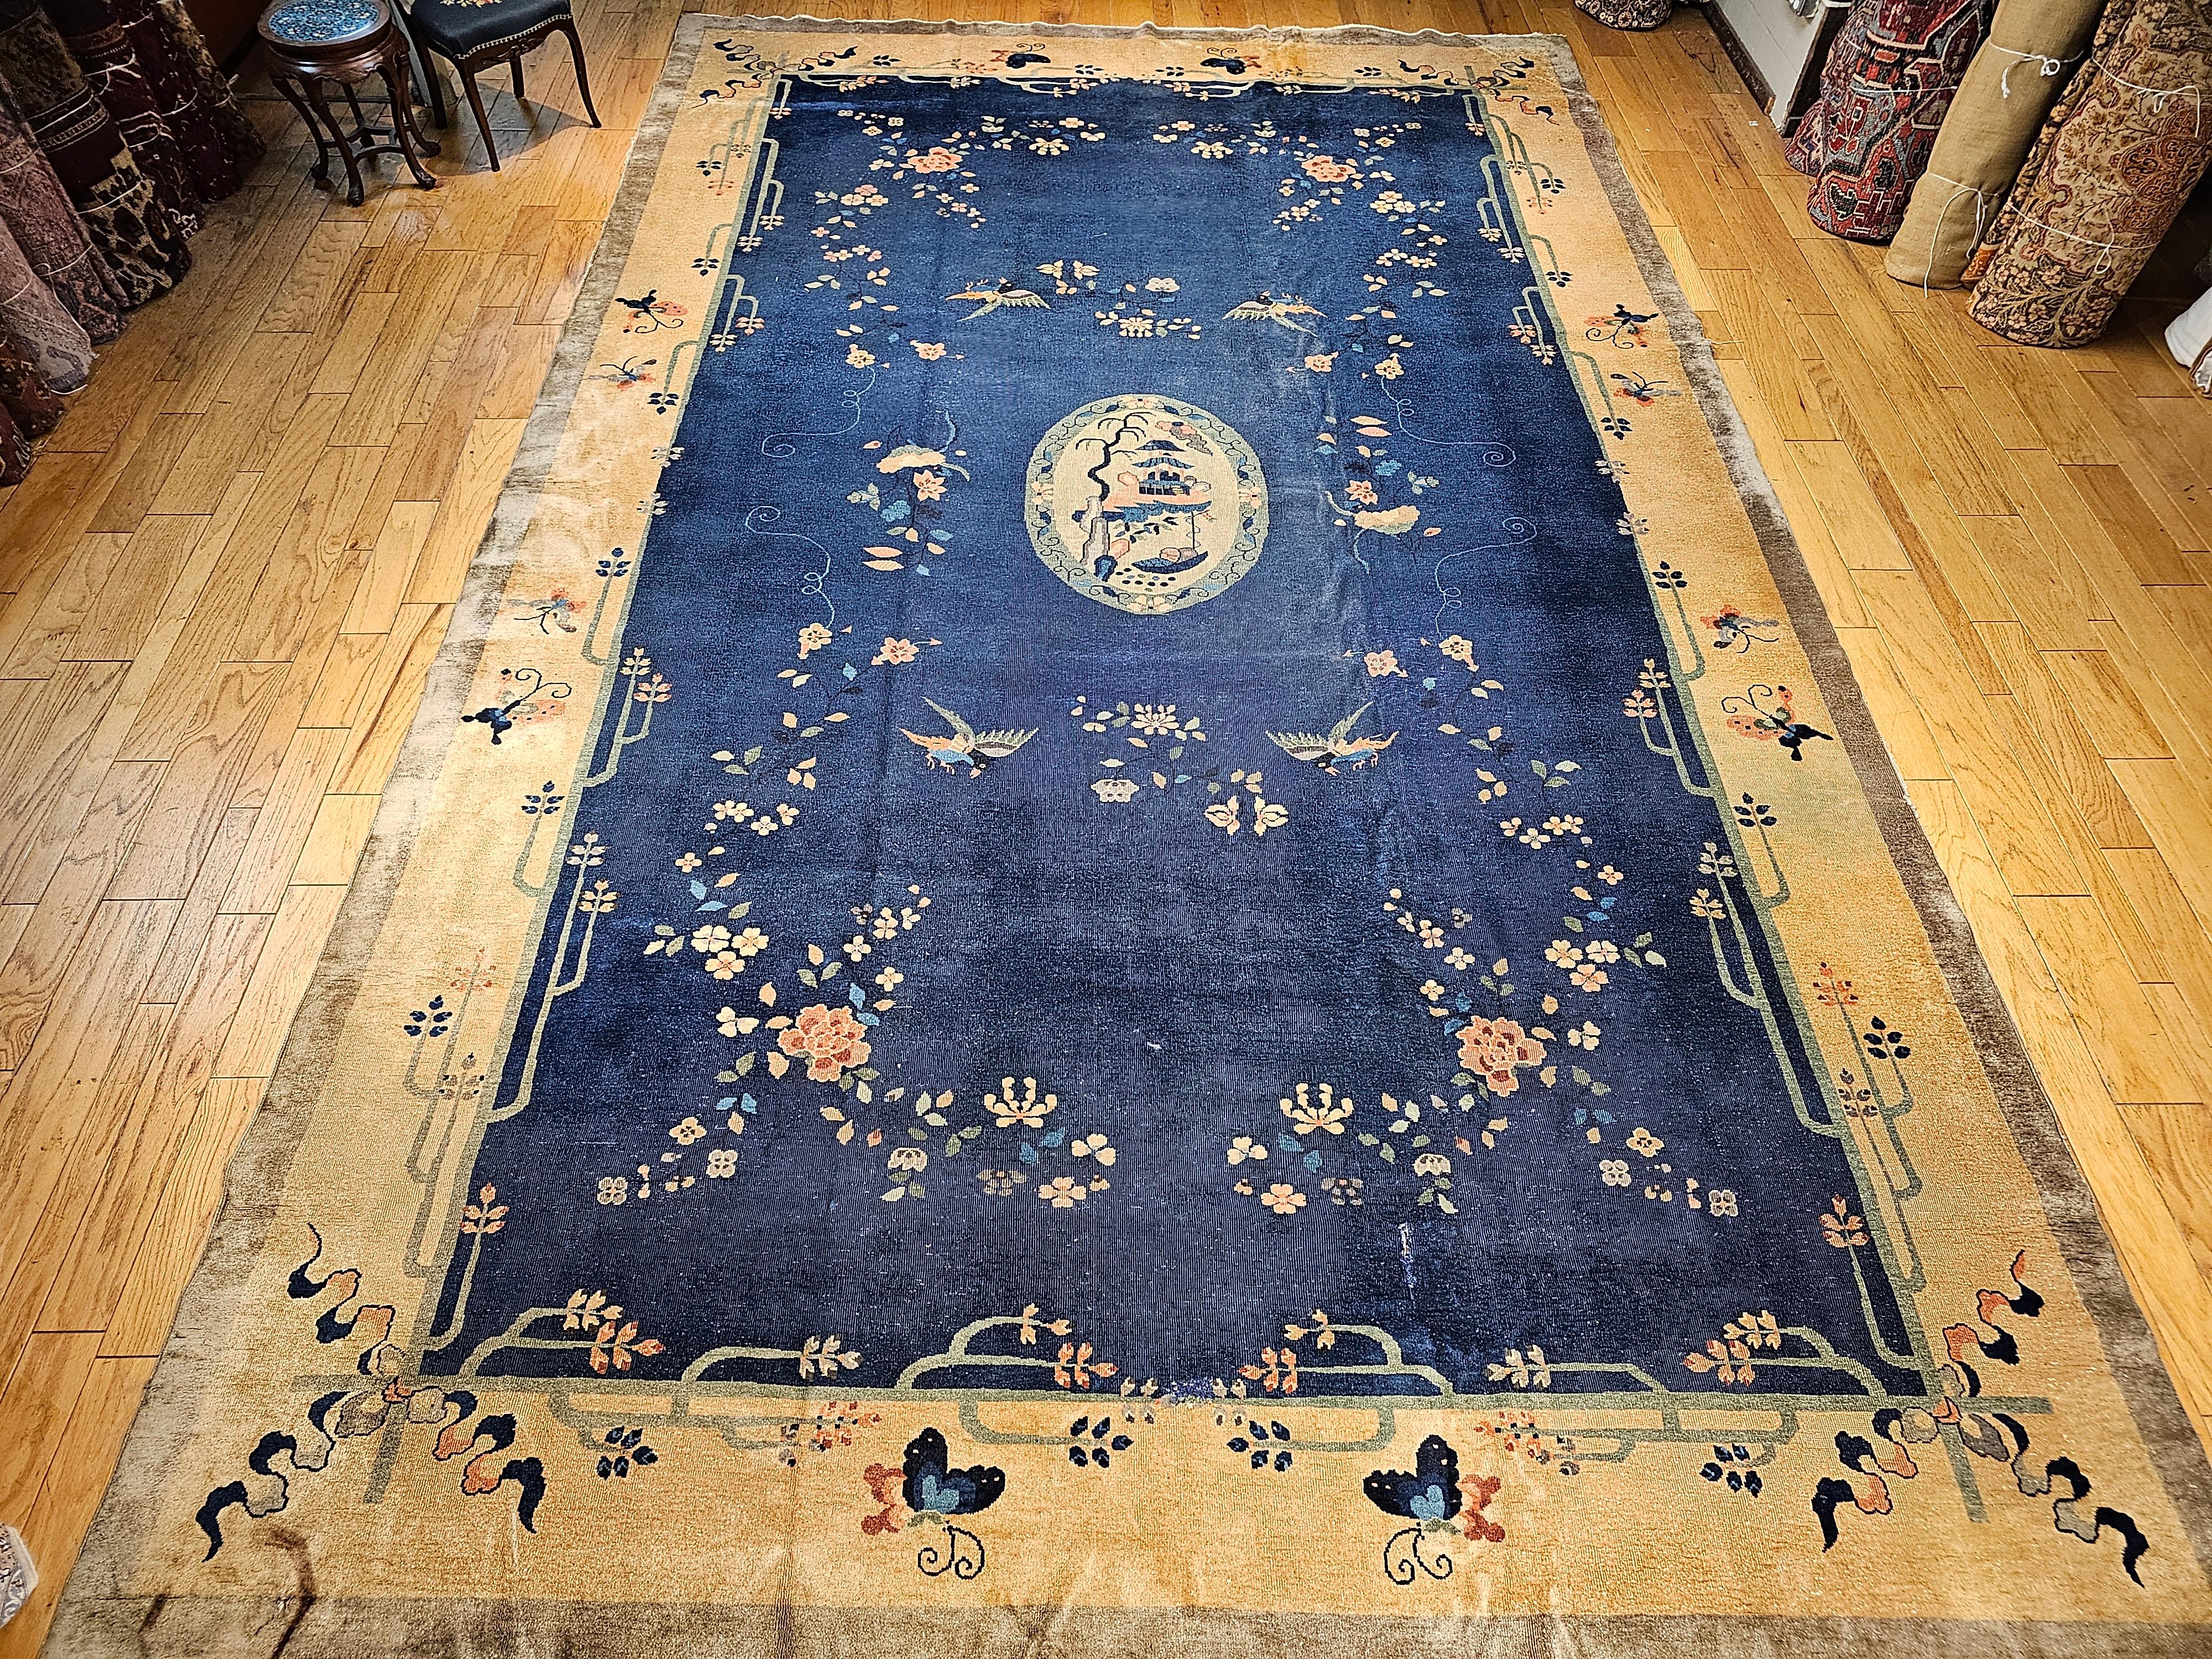 Vintage oversized Chinese Art Deco rug in French blue and tan from the early 20th century.   The rug has a beautiful center medallion, the scene of a pagoda temple and a river that reminds one of a peaceful Japanese meditation garden.  The design